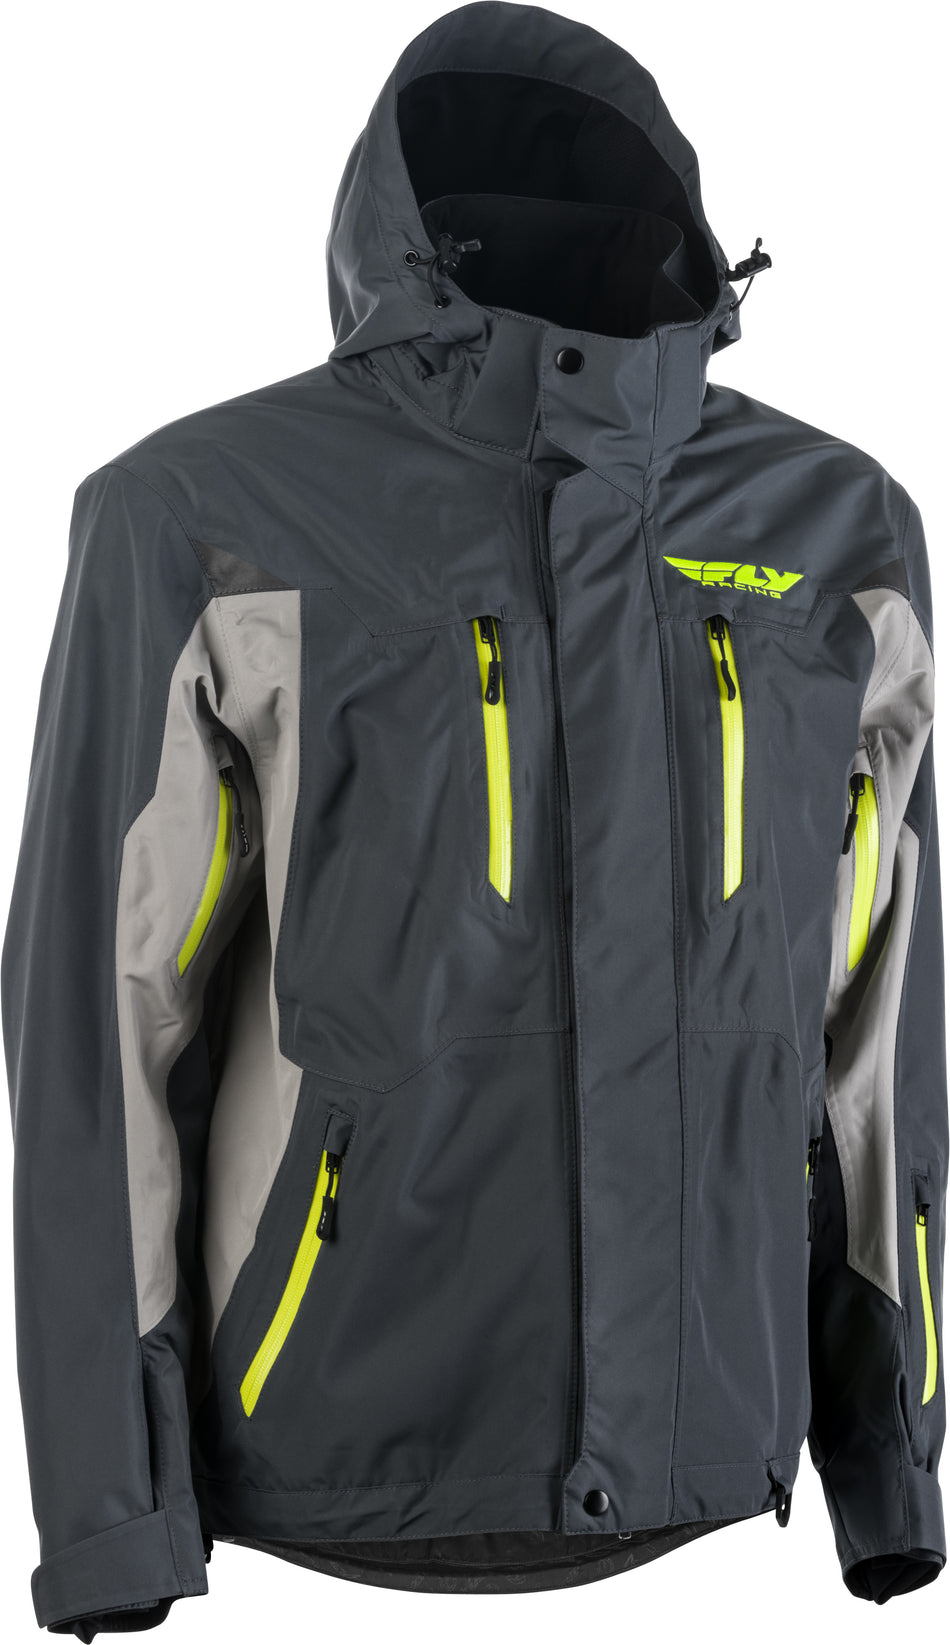 FLY RACING Fly Incline Jacket Grey/Charcoal 3x 470-41013X